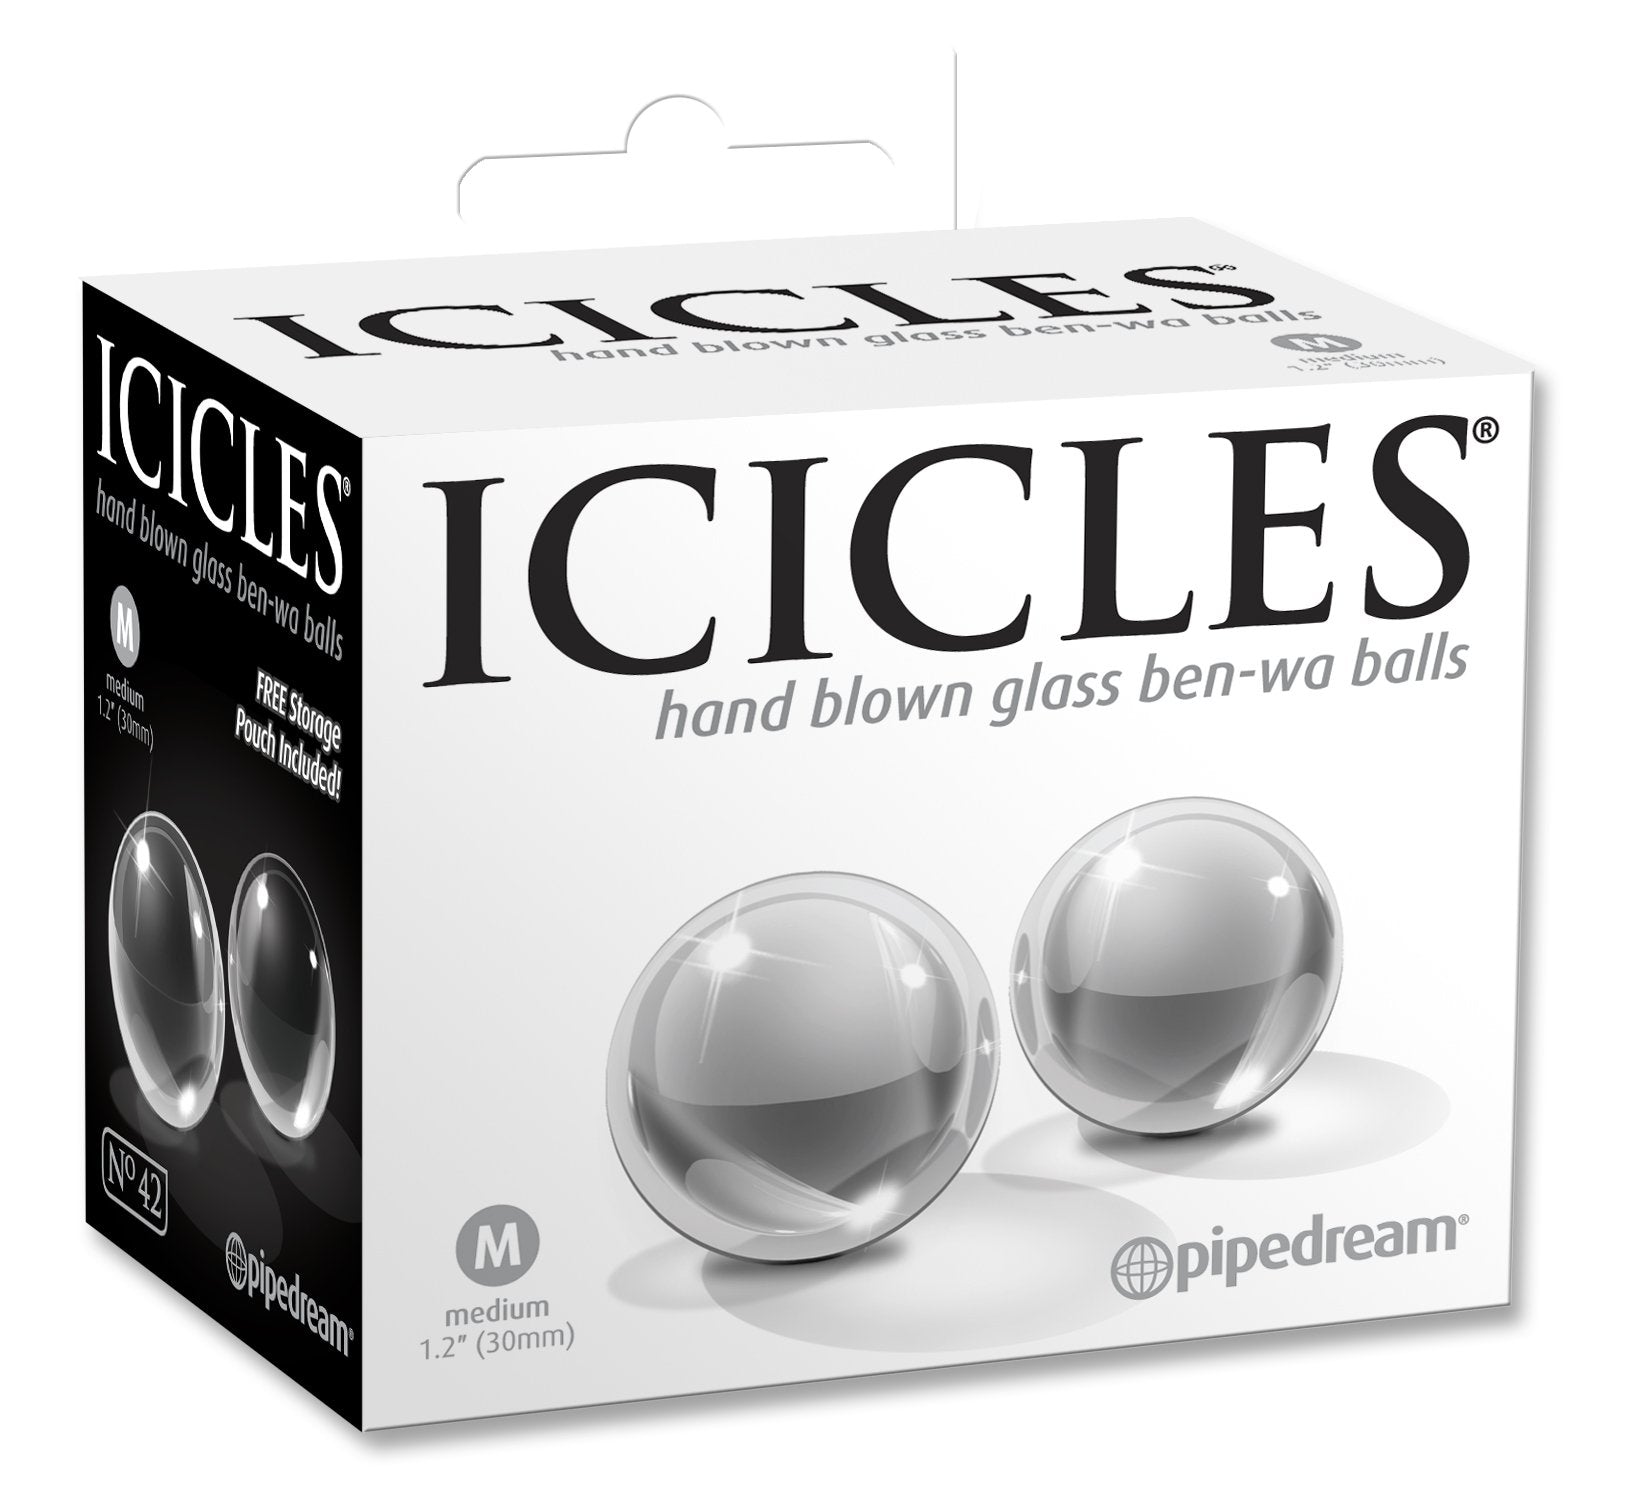 Icicles No 42 Hand Blown Glass Ben Wa Balls - Buy At Luxury Toy X - Free 3-Day Shipping